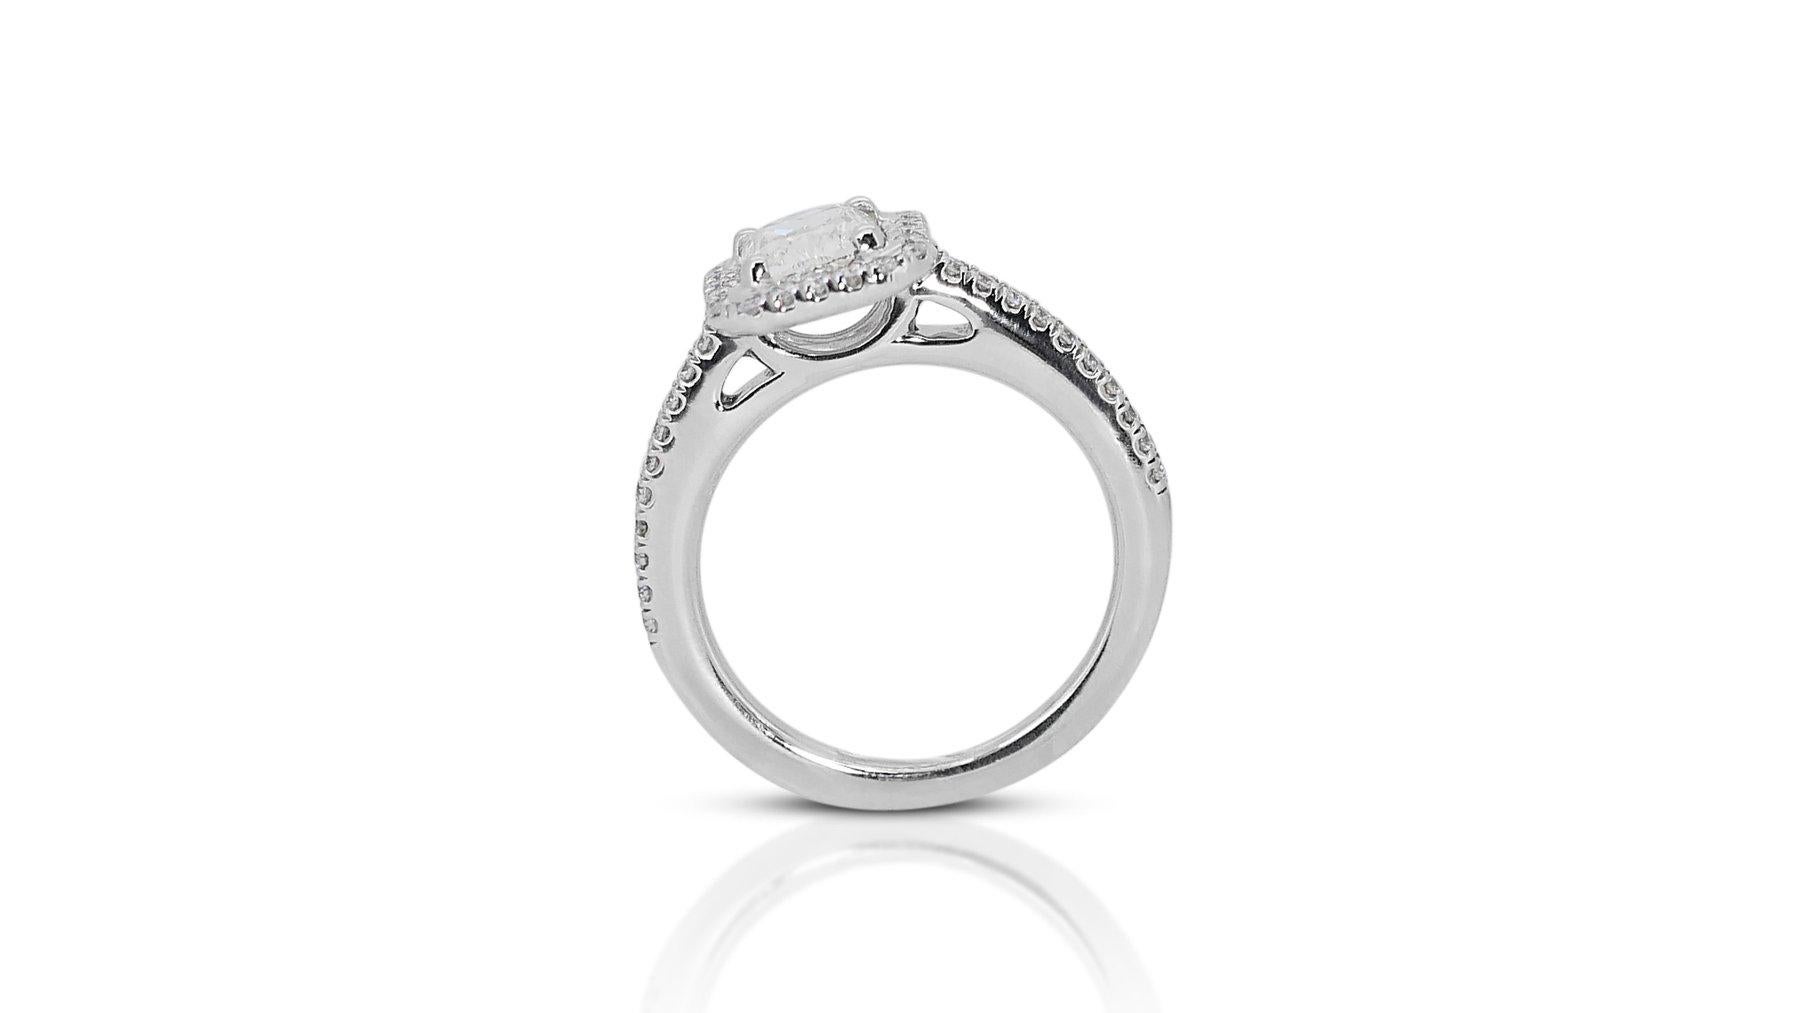 Cushion Cut Majestic 1.71ct Diamond Halo Ring in 18k White Gold - GIA Certified For Sale